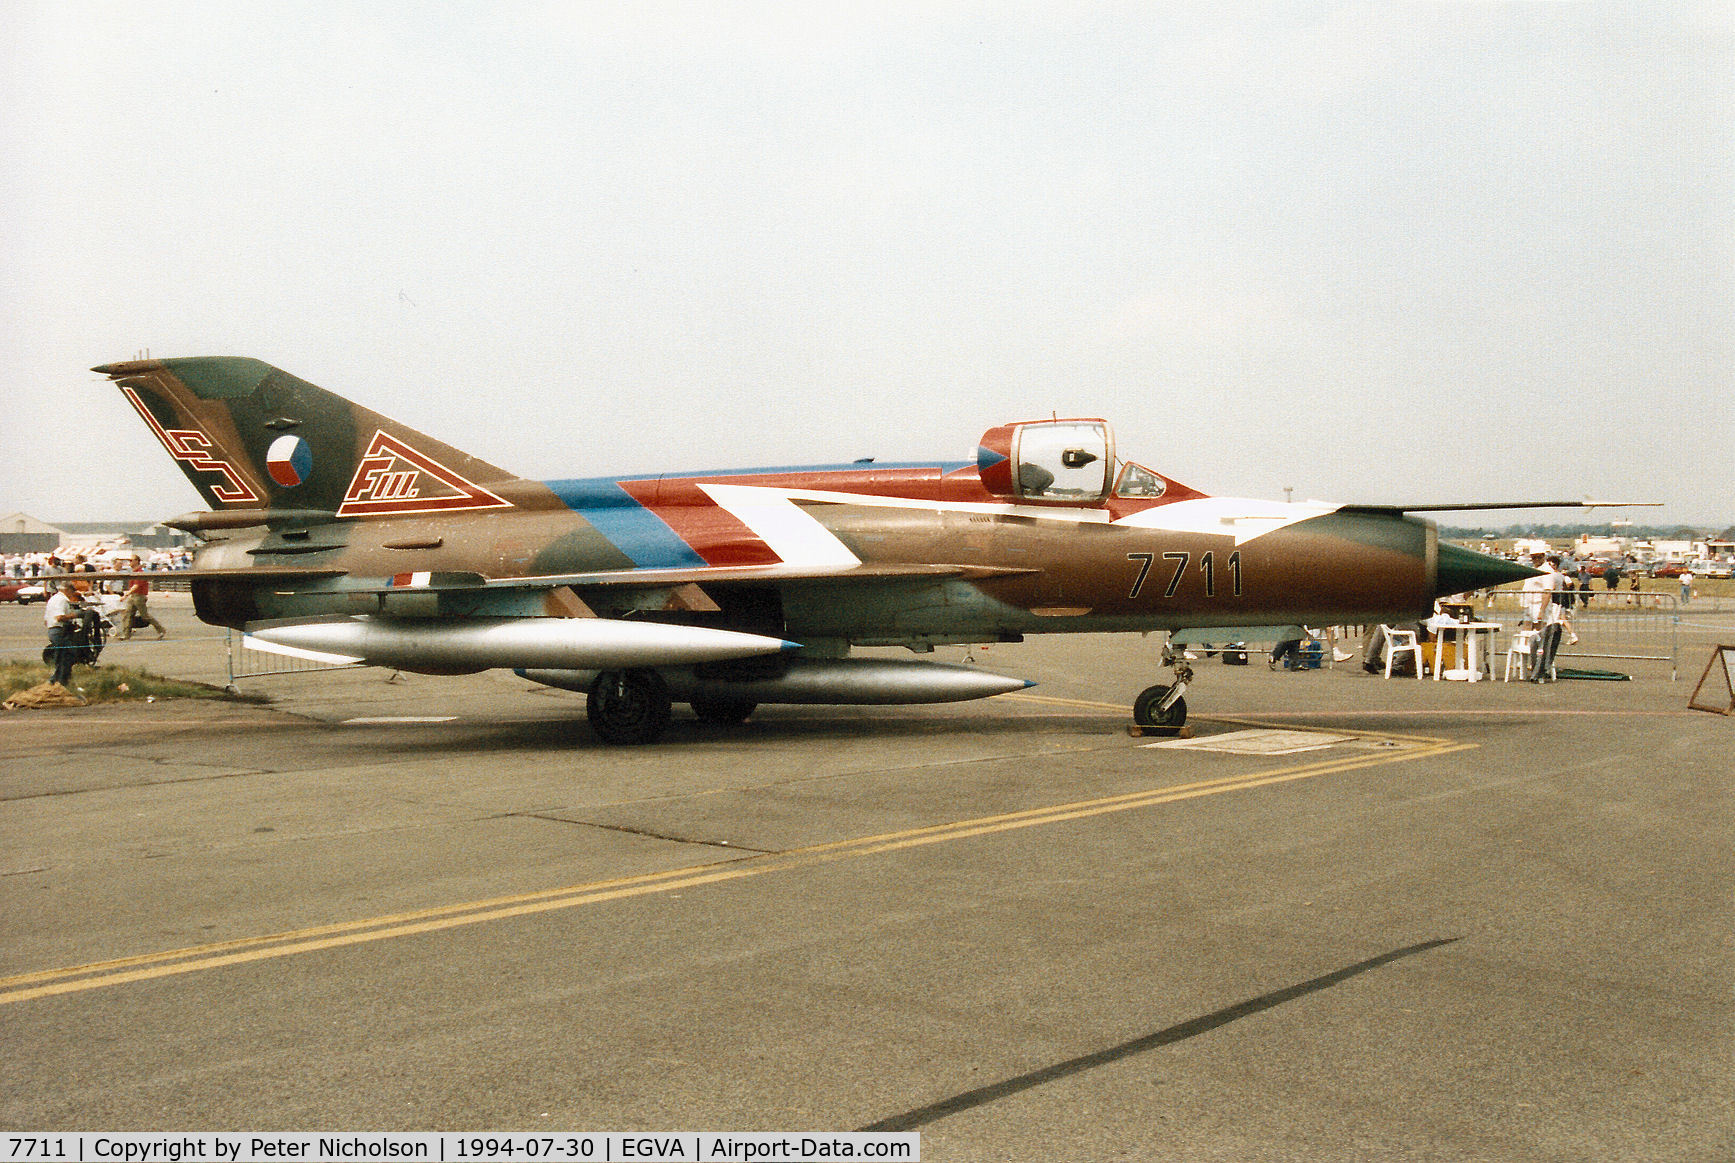 7711, Mikoyan-Gurevich MiG-21MF C/N 967711, MiG-21MF Fishbed of 11 SLP Czech Air Force on display at the 1994 Intnl Air Tattoo at RAF Fairford.